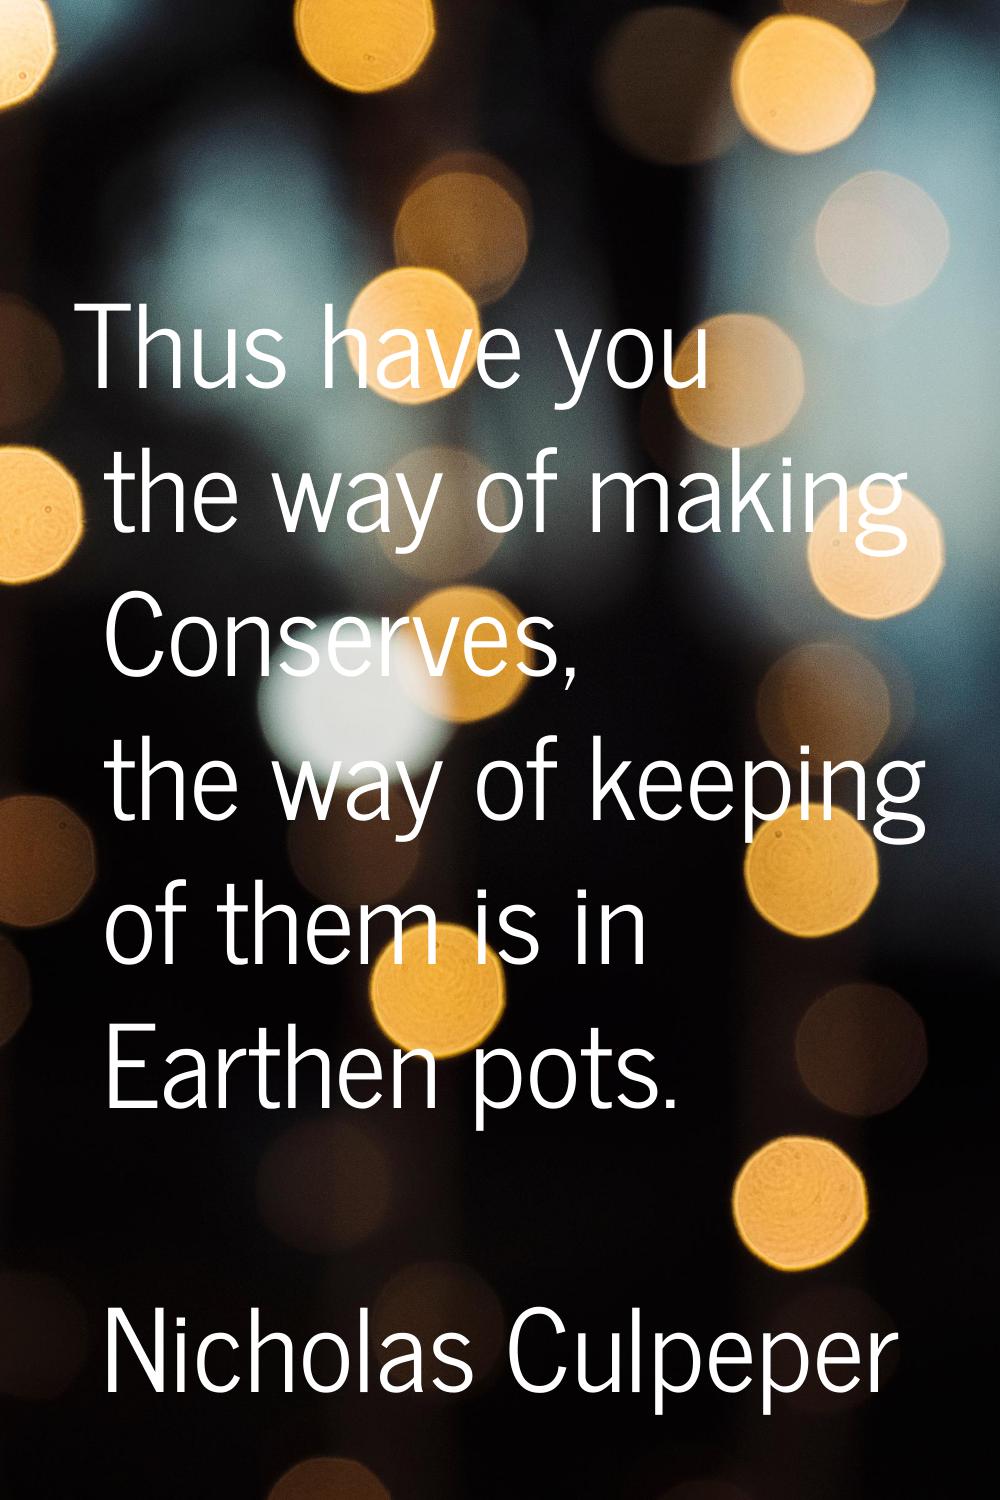 Thus have you the way of making Conserves, the way of keeping of them is in Earthen pots.